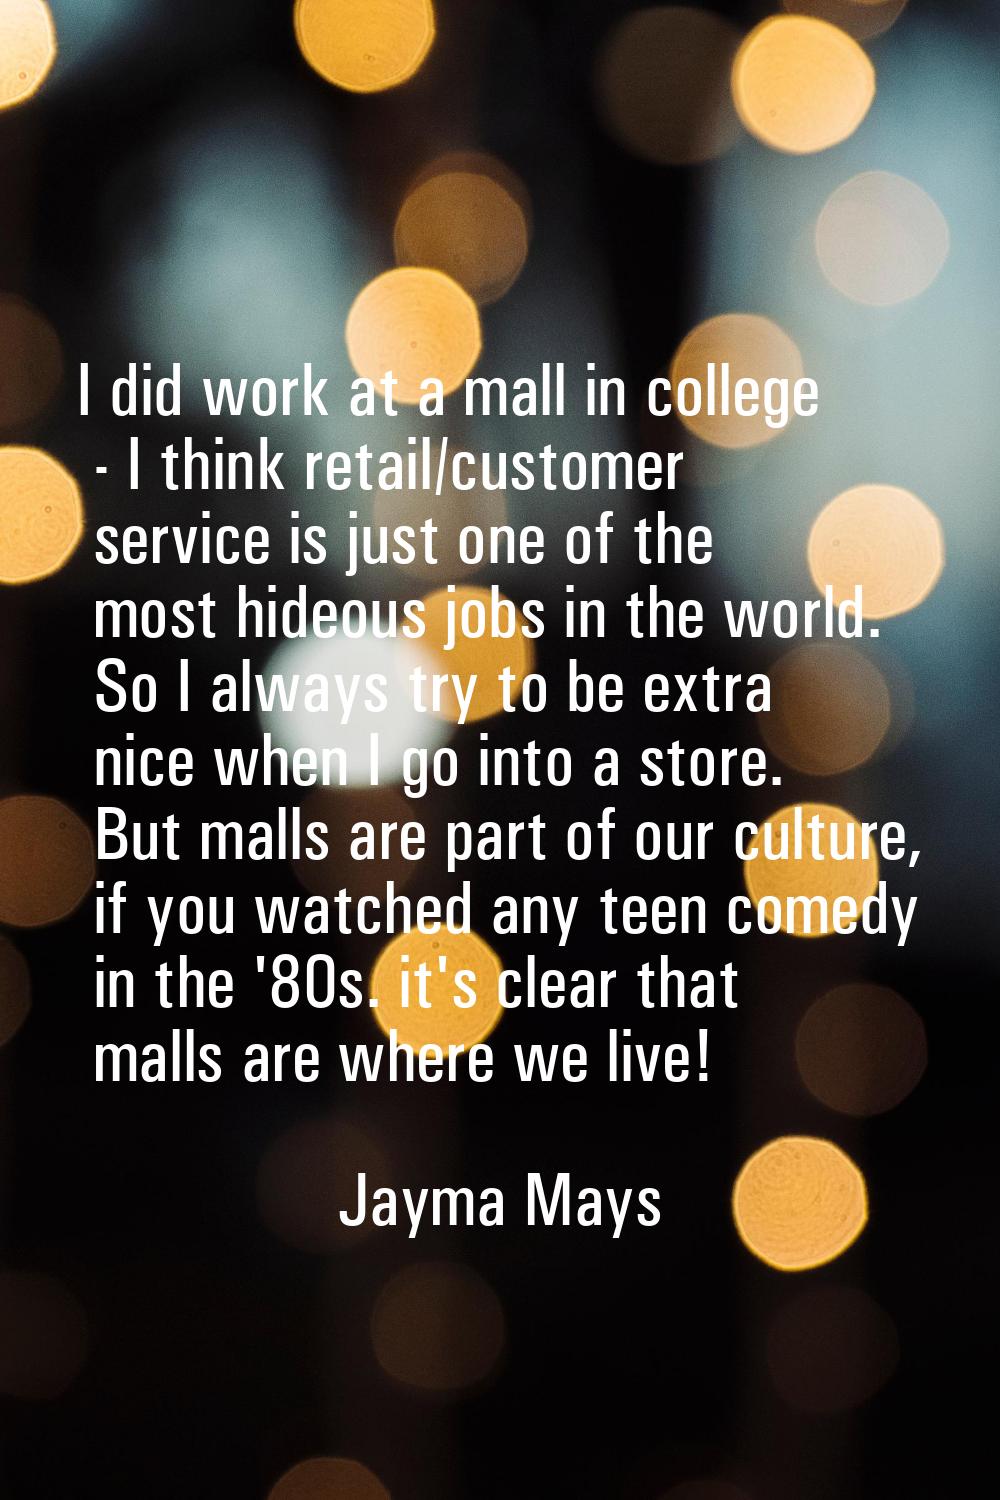 I did work at a mall in college - I think retail/customer service is just one of the most hideous j